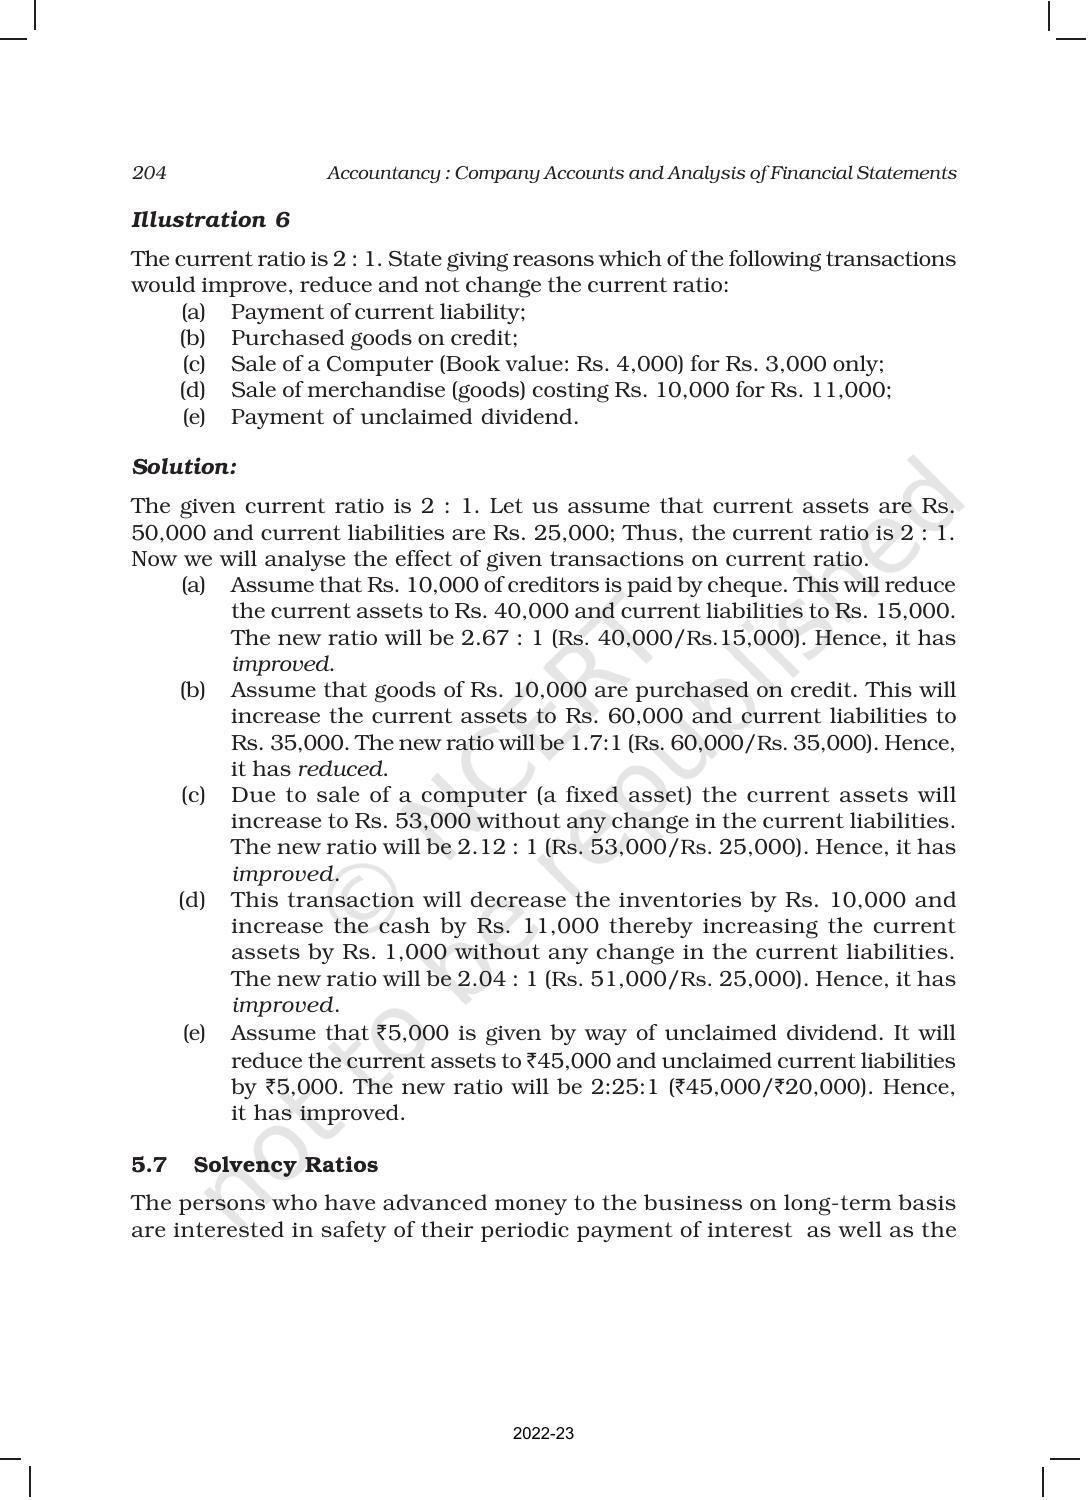 NCERT Book for Class 12 Accountancy Part II Chapter 5 Accounting Ratios - Page 11